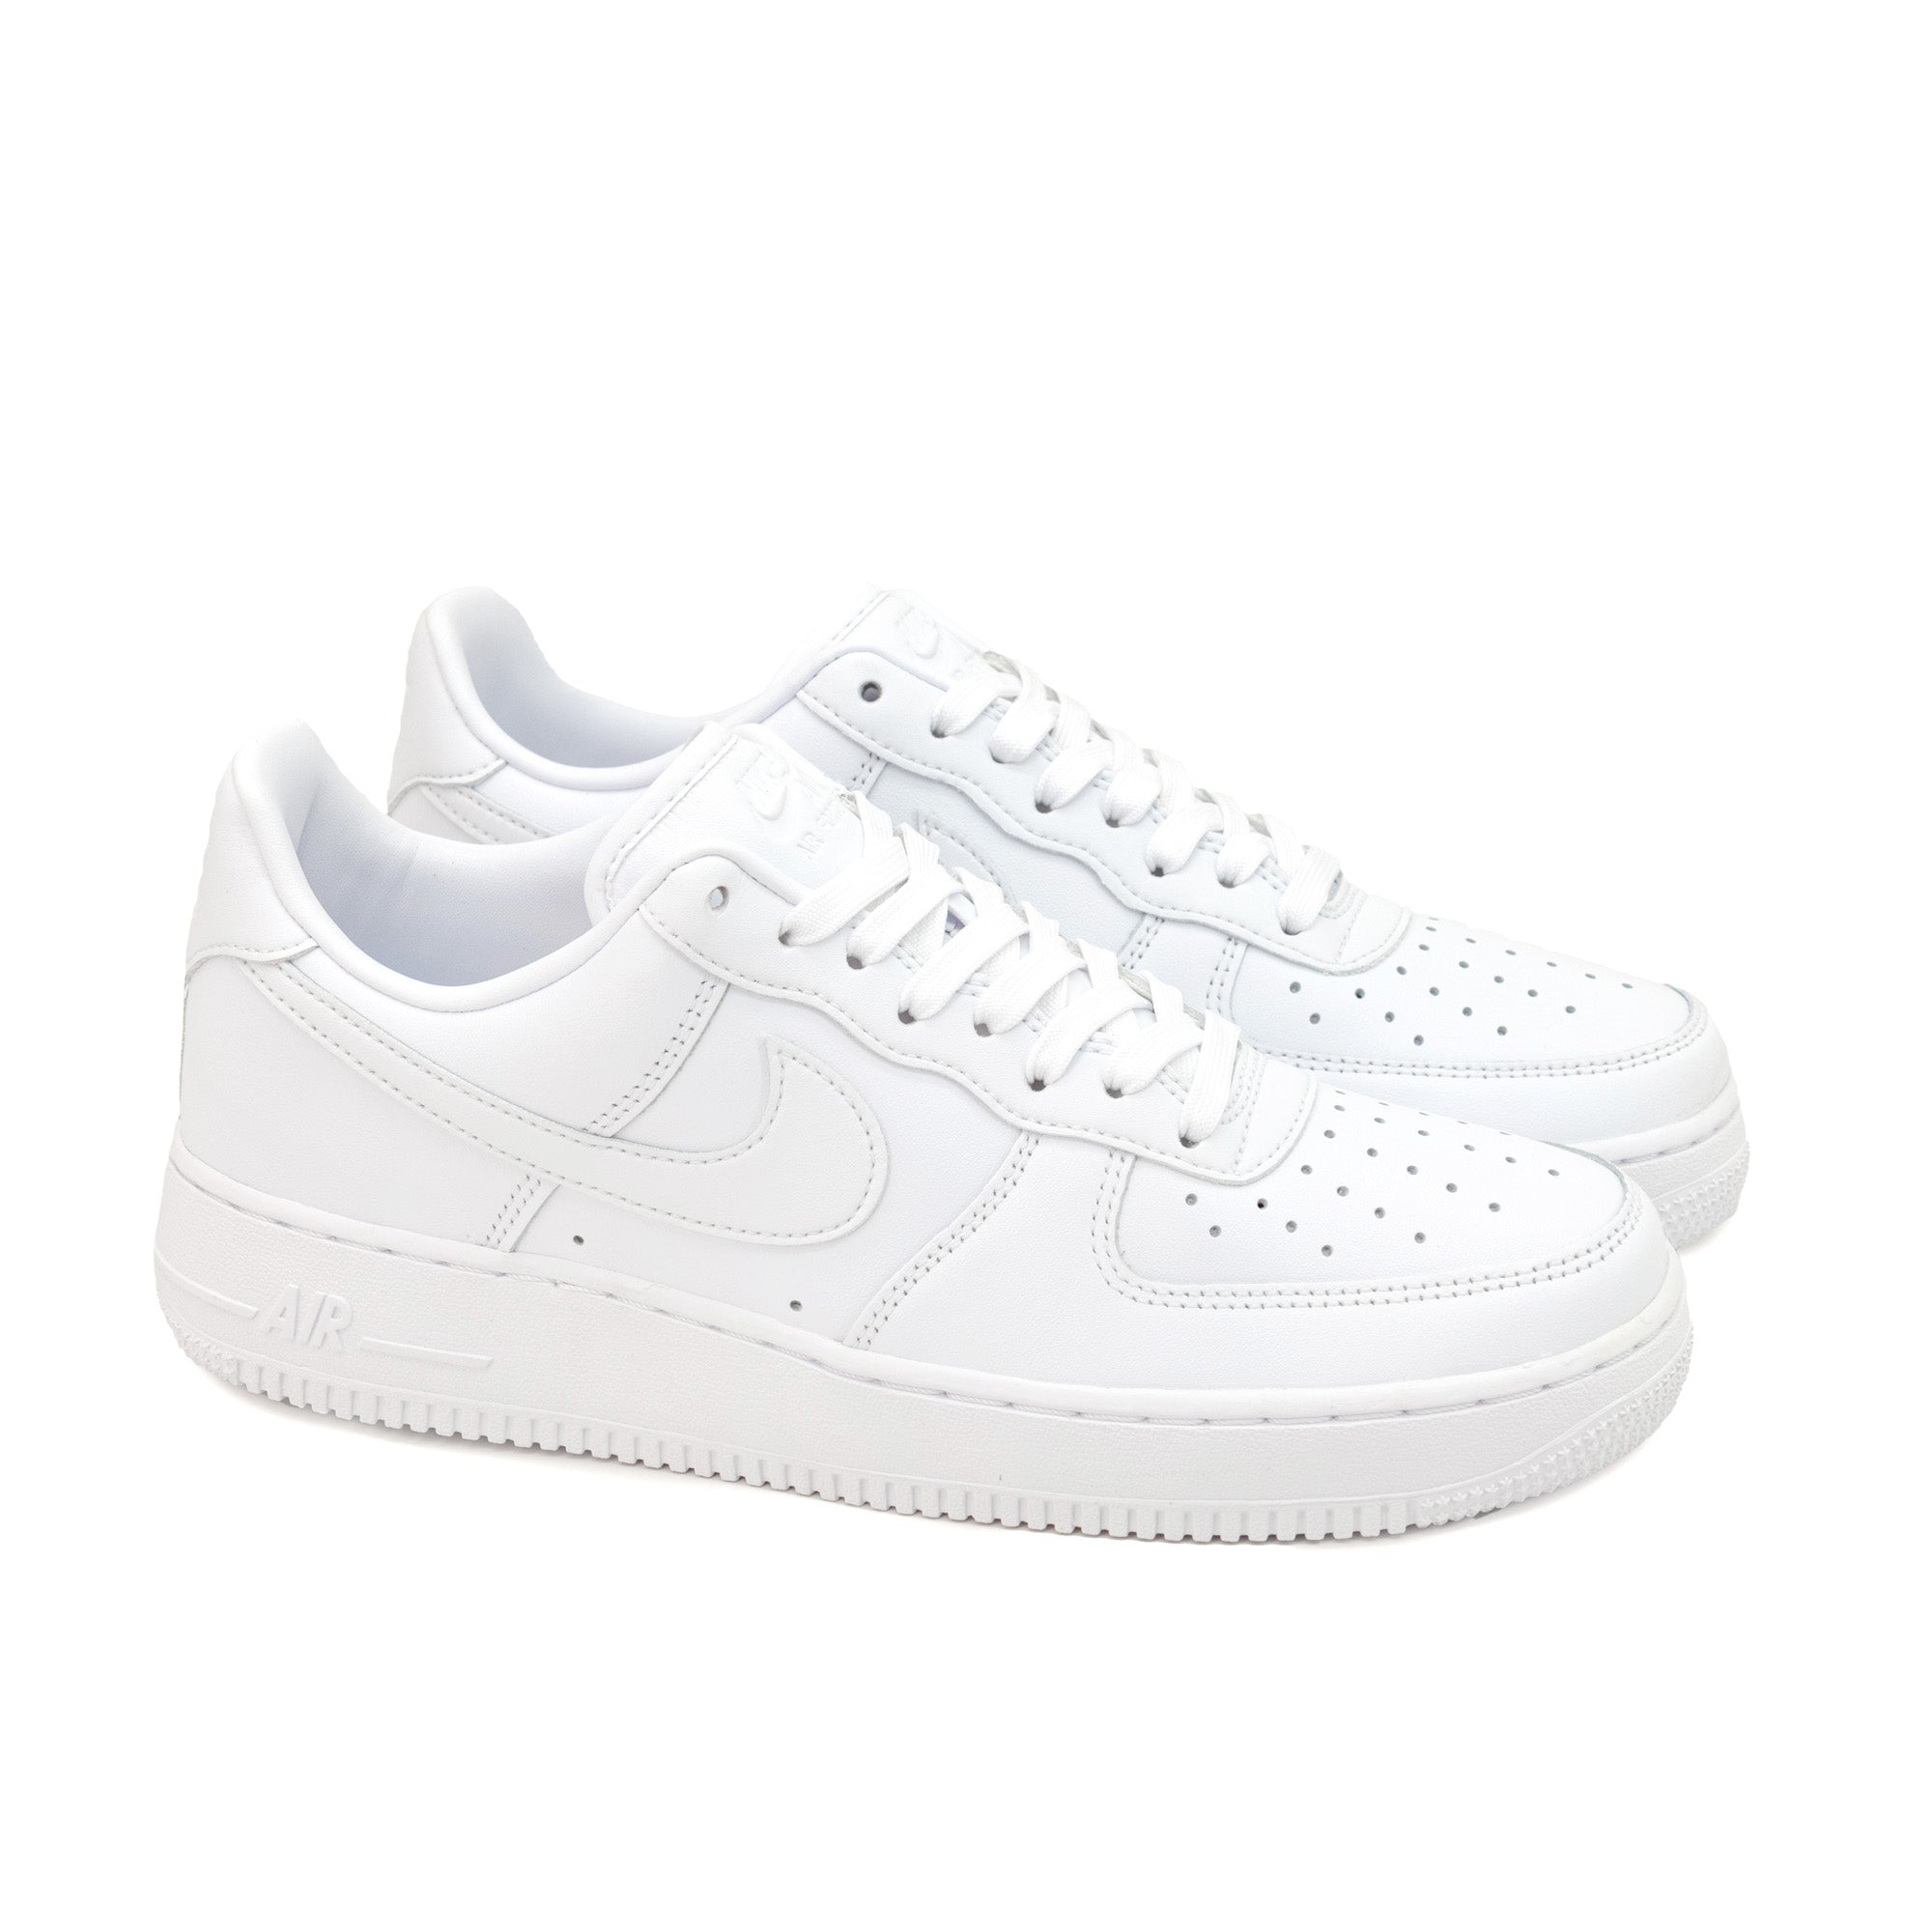 operator Embryo Pence Nike Air Force 1 Low 07 "Fresh" White DM0211-100 – Laced